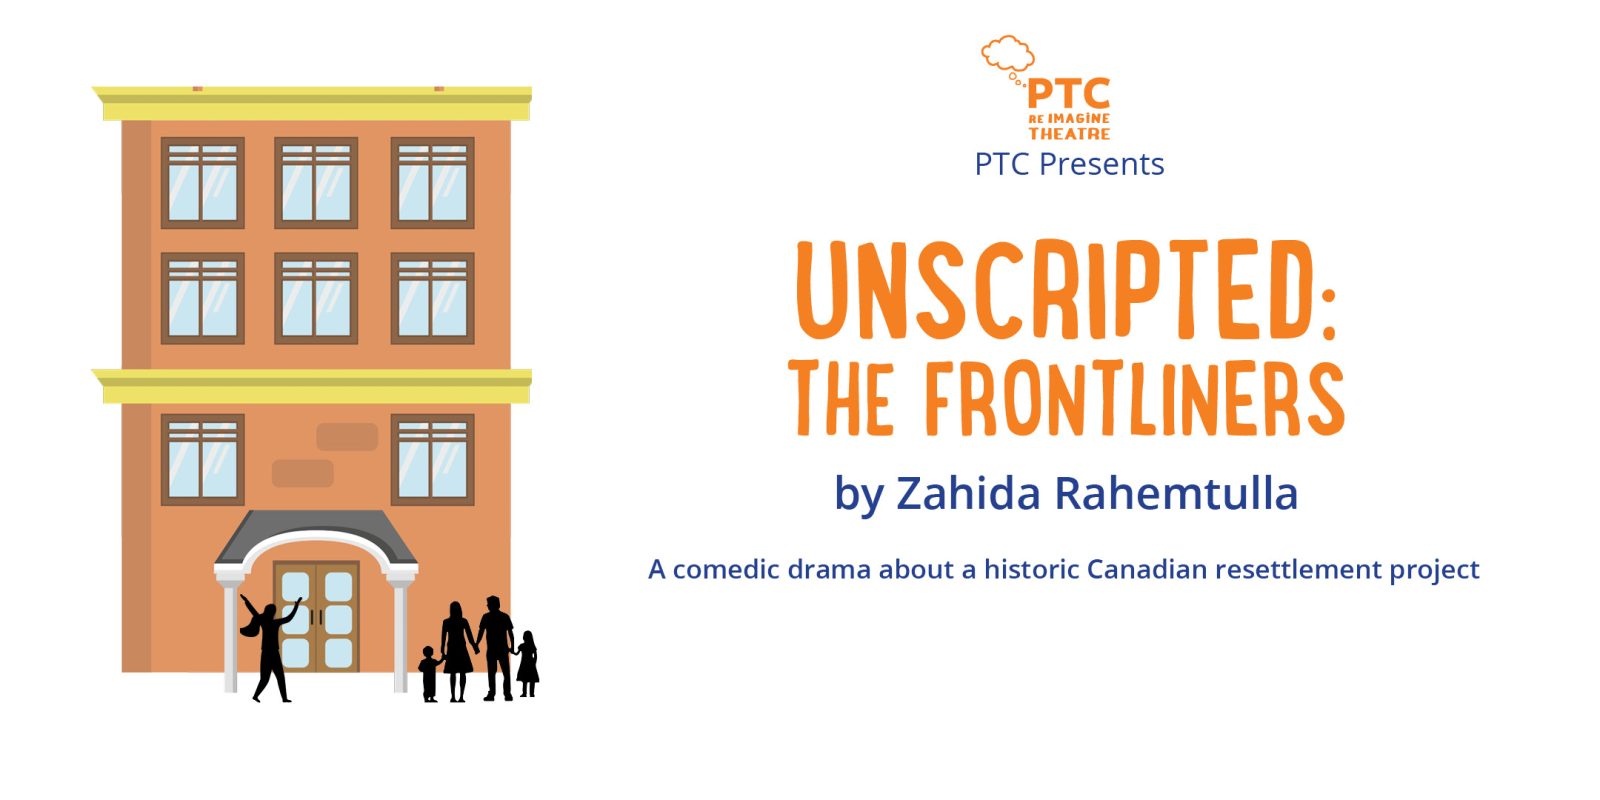 Orange hotel on left with silhouettes of settlement worker with open arms welcoming a refugee family, right text: PTC Presents UNSCRIPTED: THE FRONTLINERS, A comedic drama about a historic Canadian resettlement project